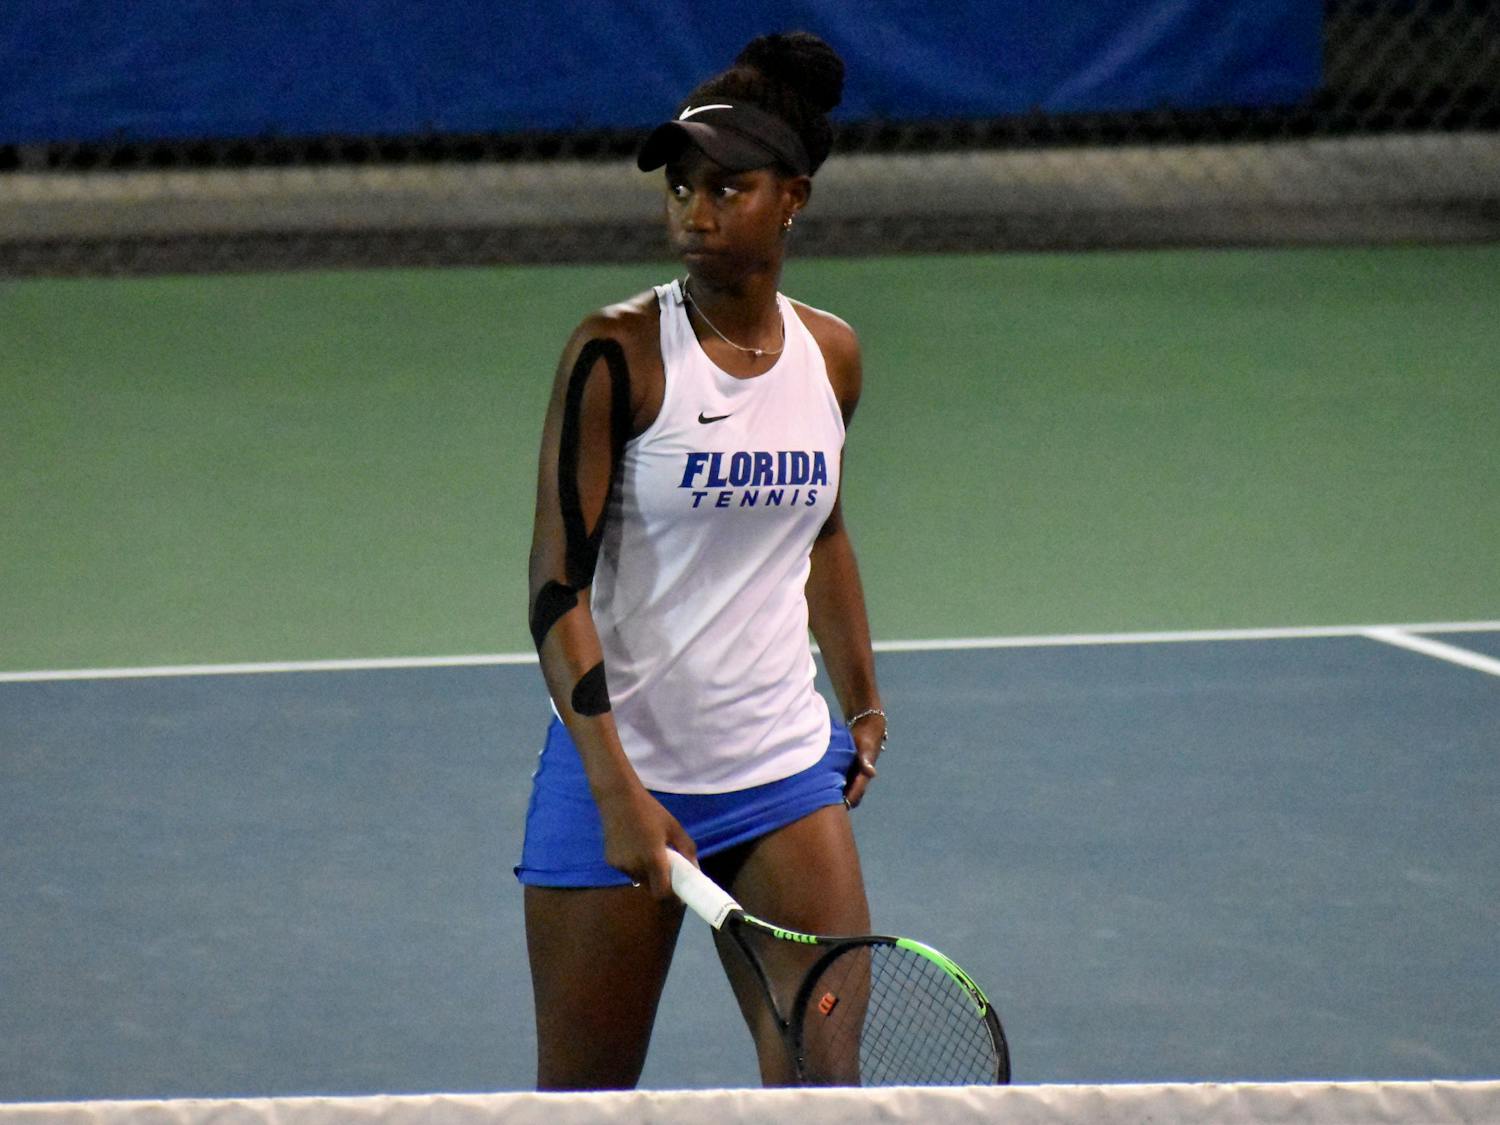 Florida senior Marlee Zein on the court during a match against UCF on Feb. 9, 2021. The No. 16 Gators surpassed Vanderbilt on the road Sunday, 6-1.